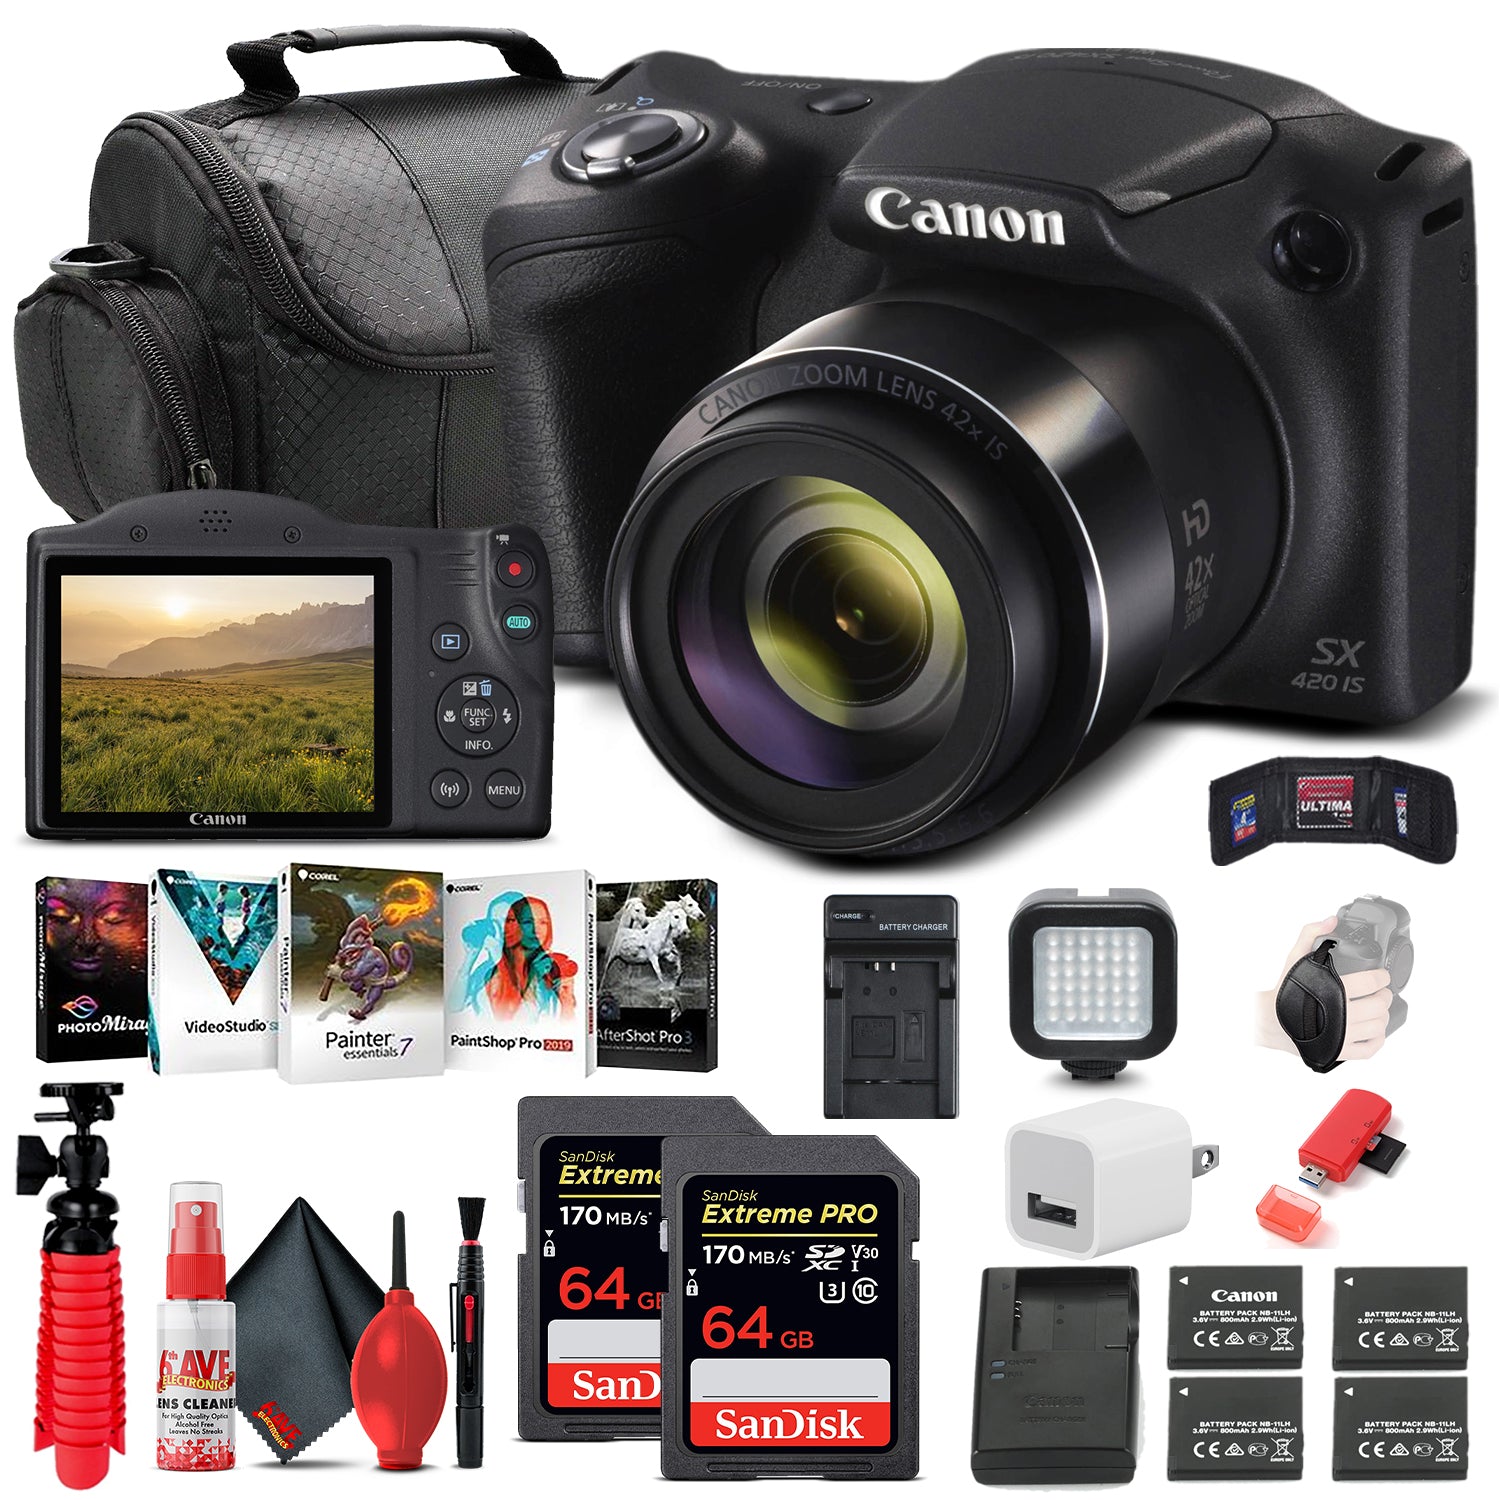 Canon PowerShot SX420 IS Digital Camera (1068C001) + 2x 64GB Cardd + More